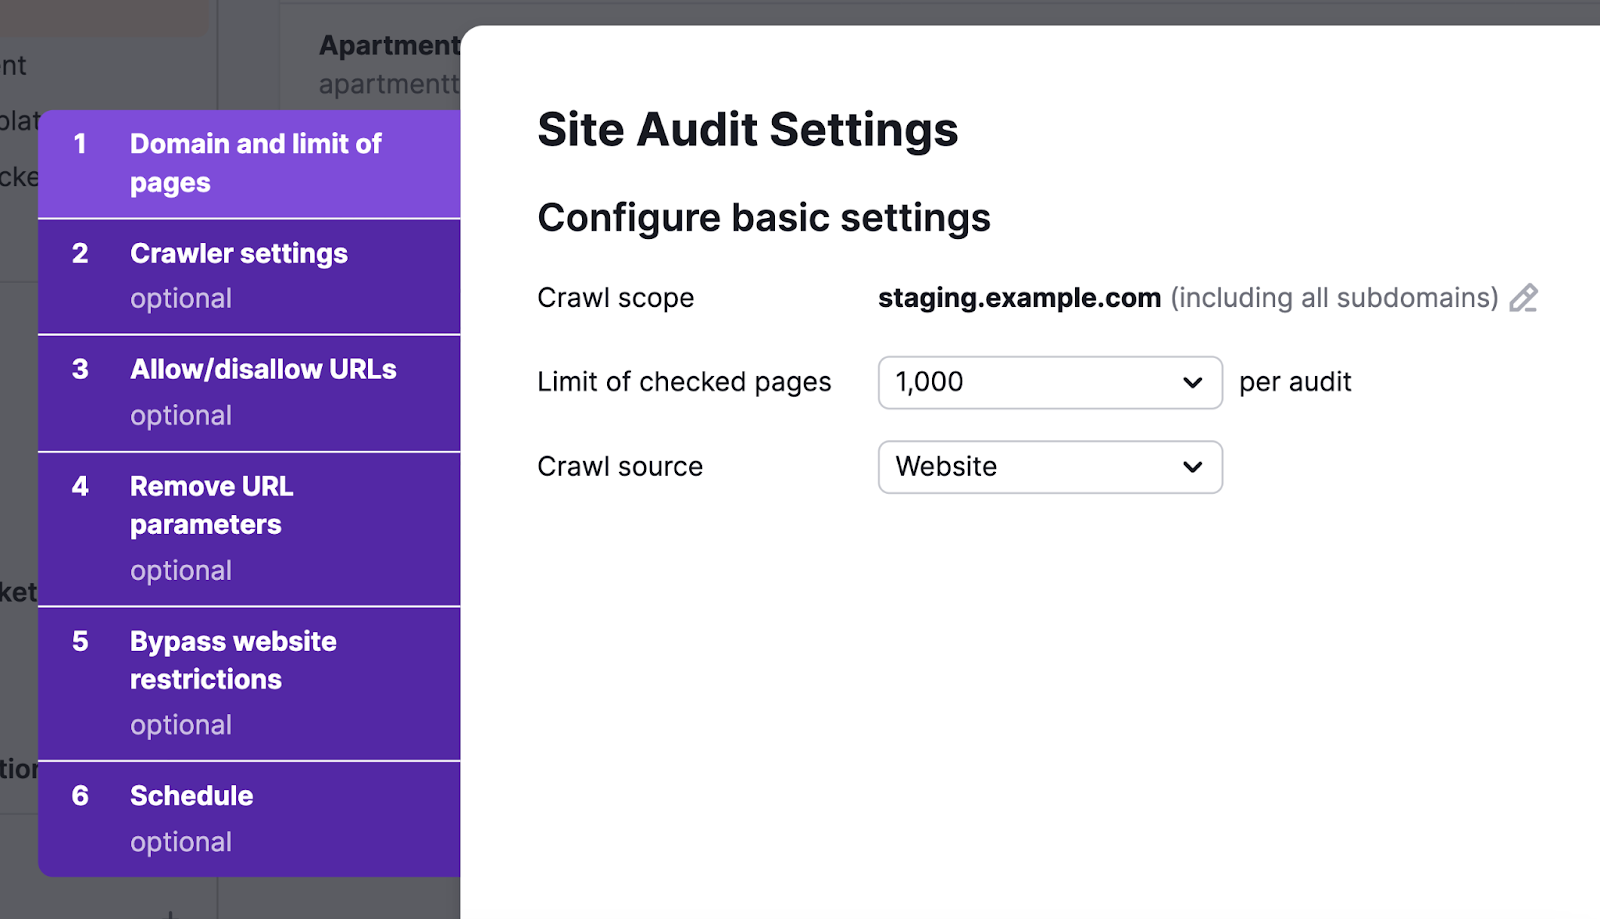 Site Audit instrumentality   basal  settings, including crawl score, bounds  of checked pages, and crawl source